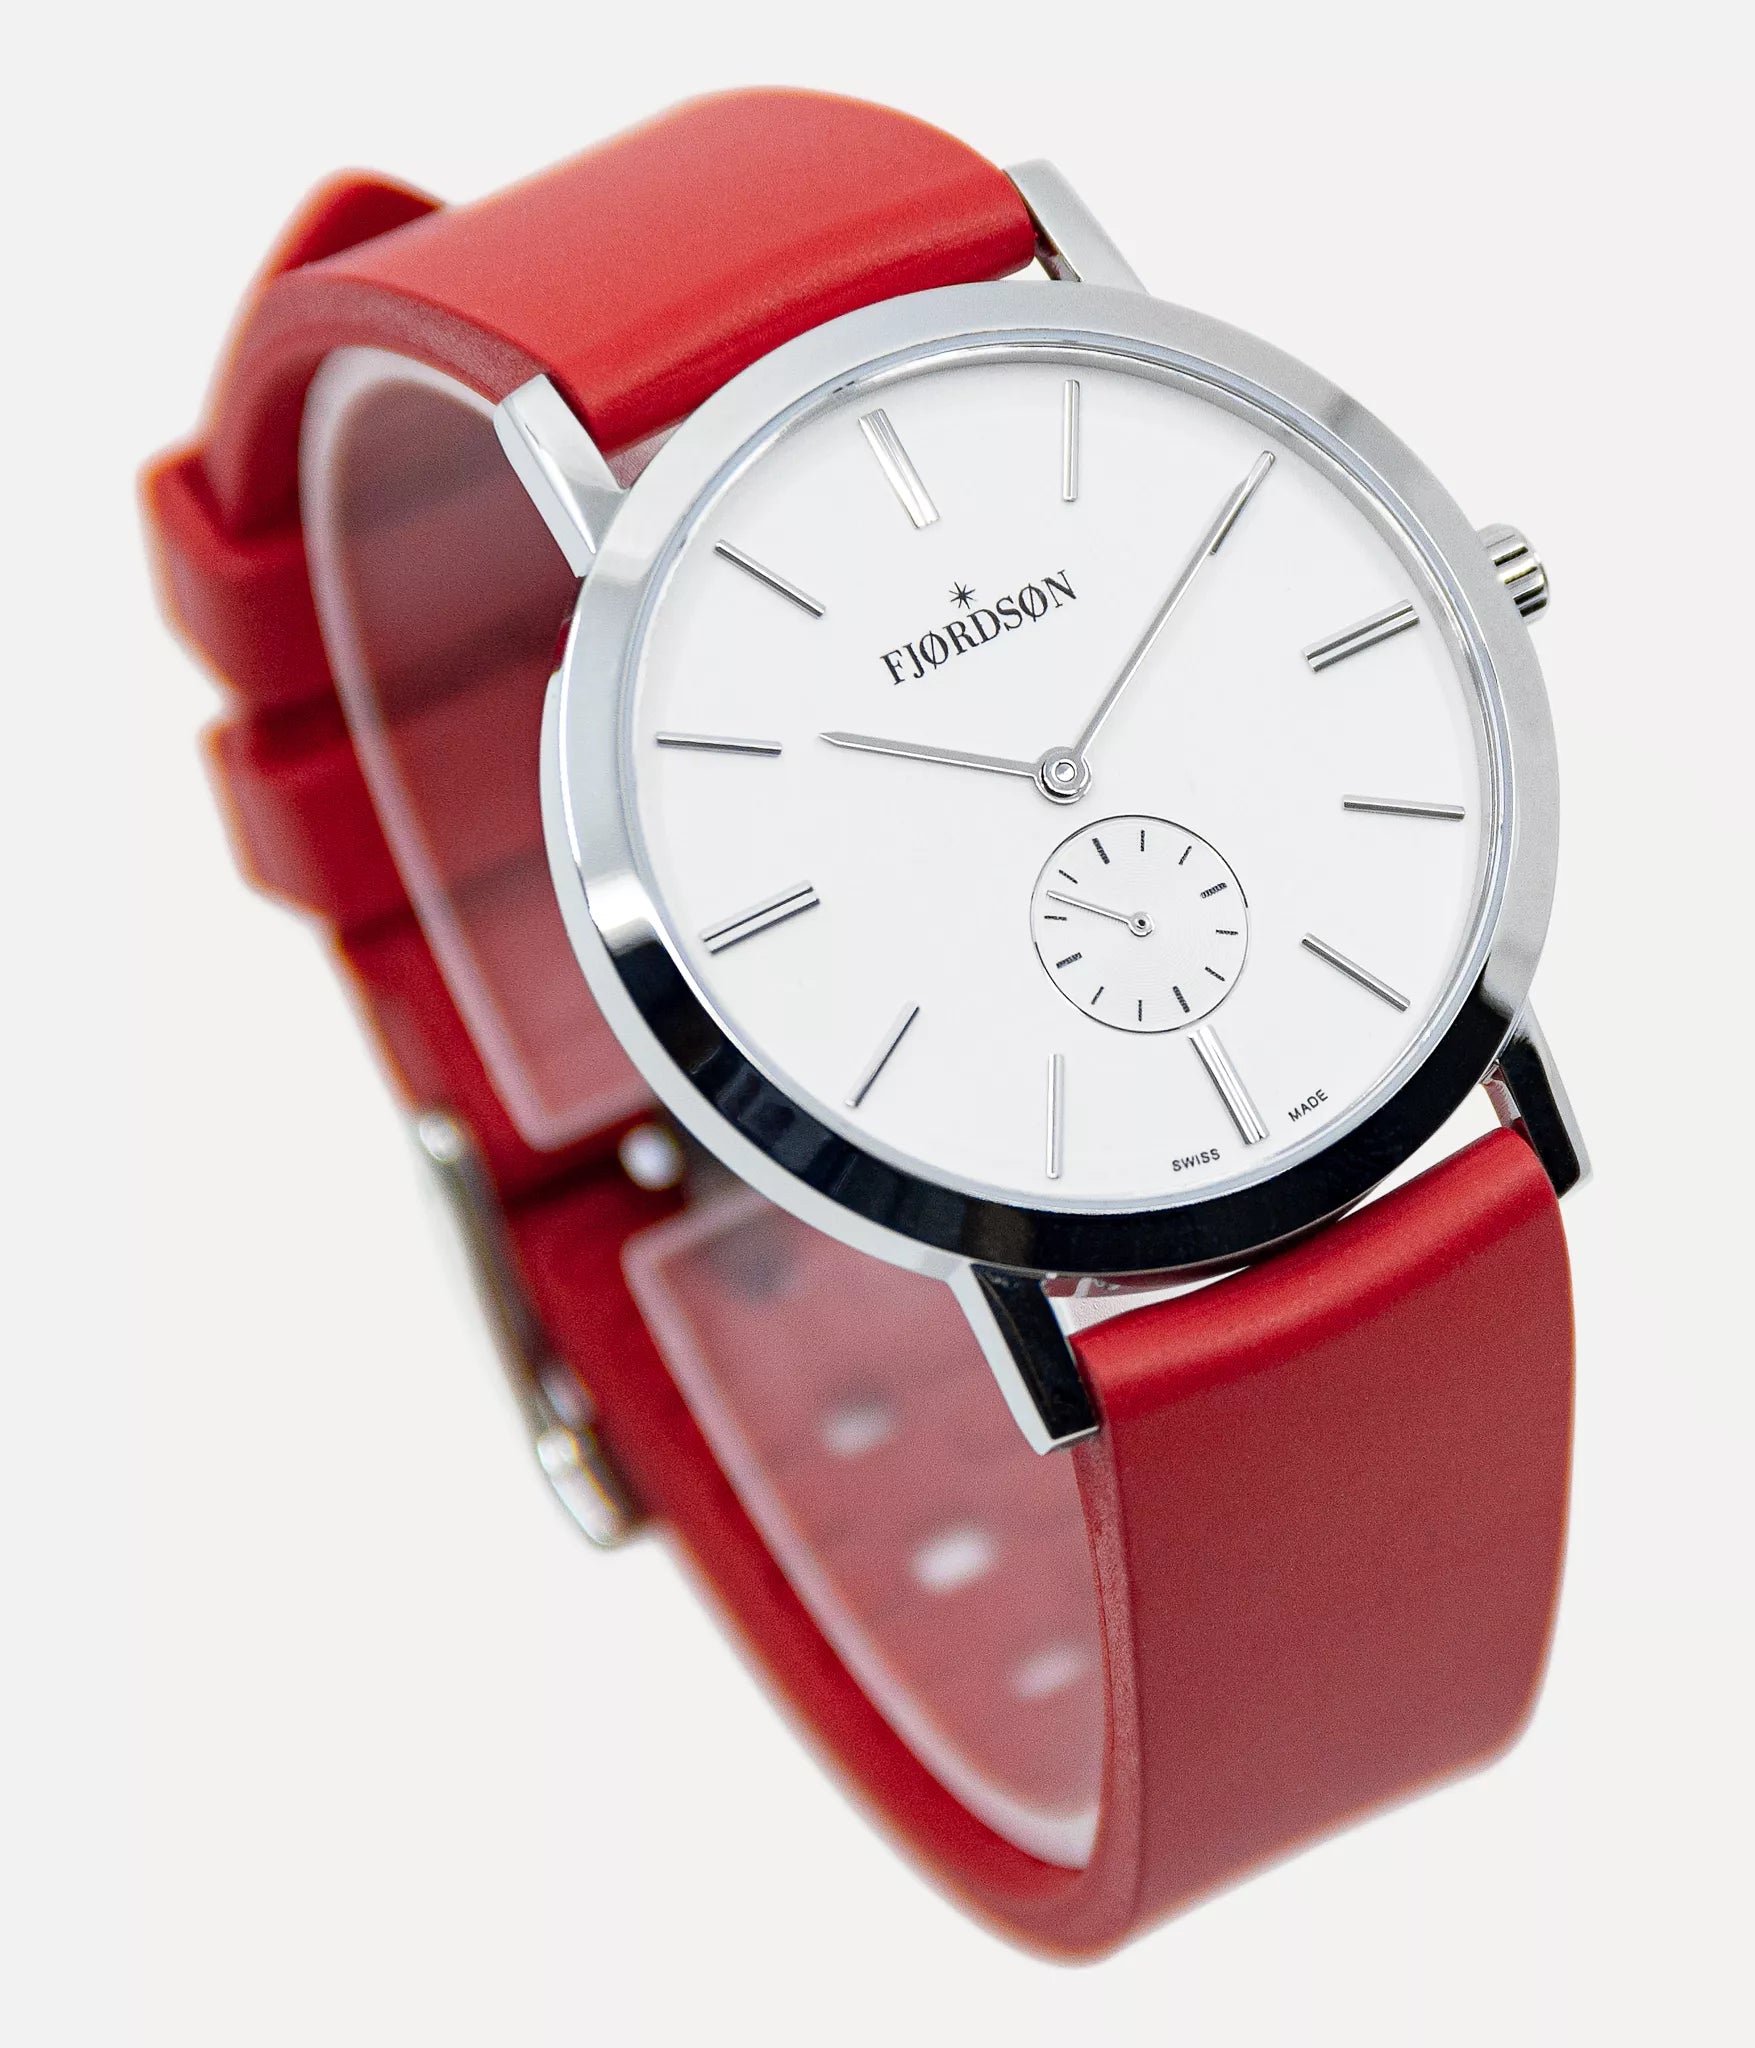 Strap on white dial UNISEX watch shot - Fjordson Red Rubber Watch strap silver buckle - MEN - vegan & approved by PETA - Swiss made